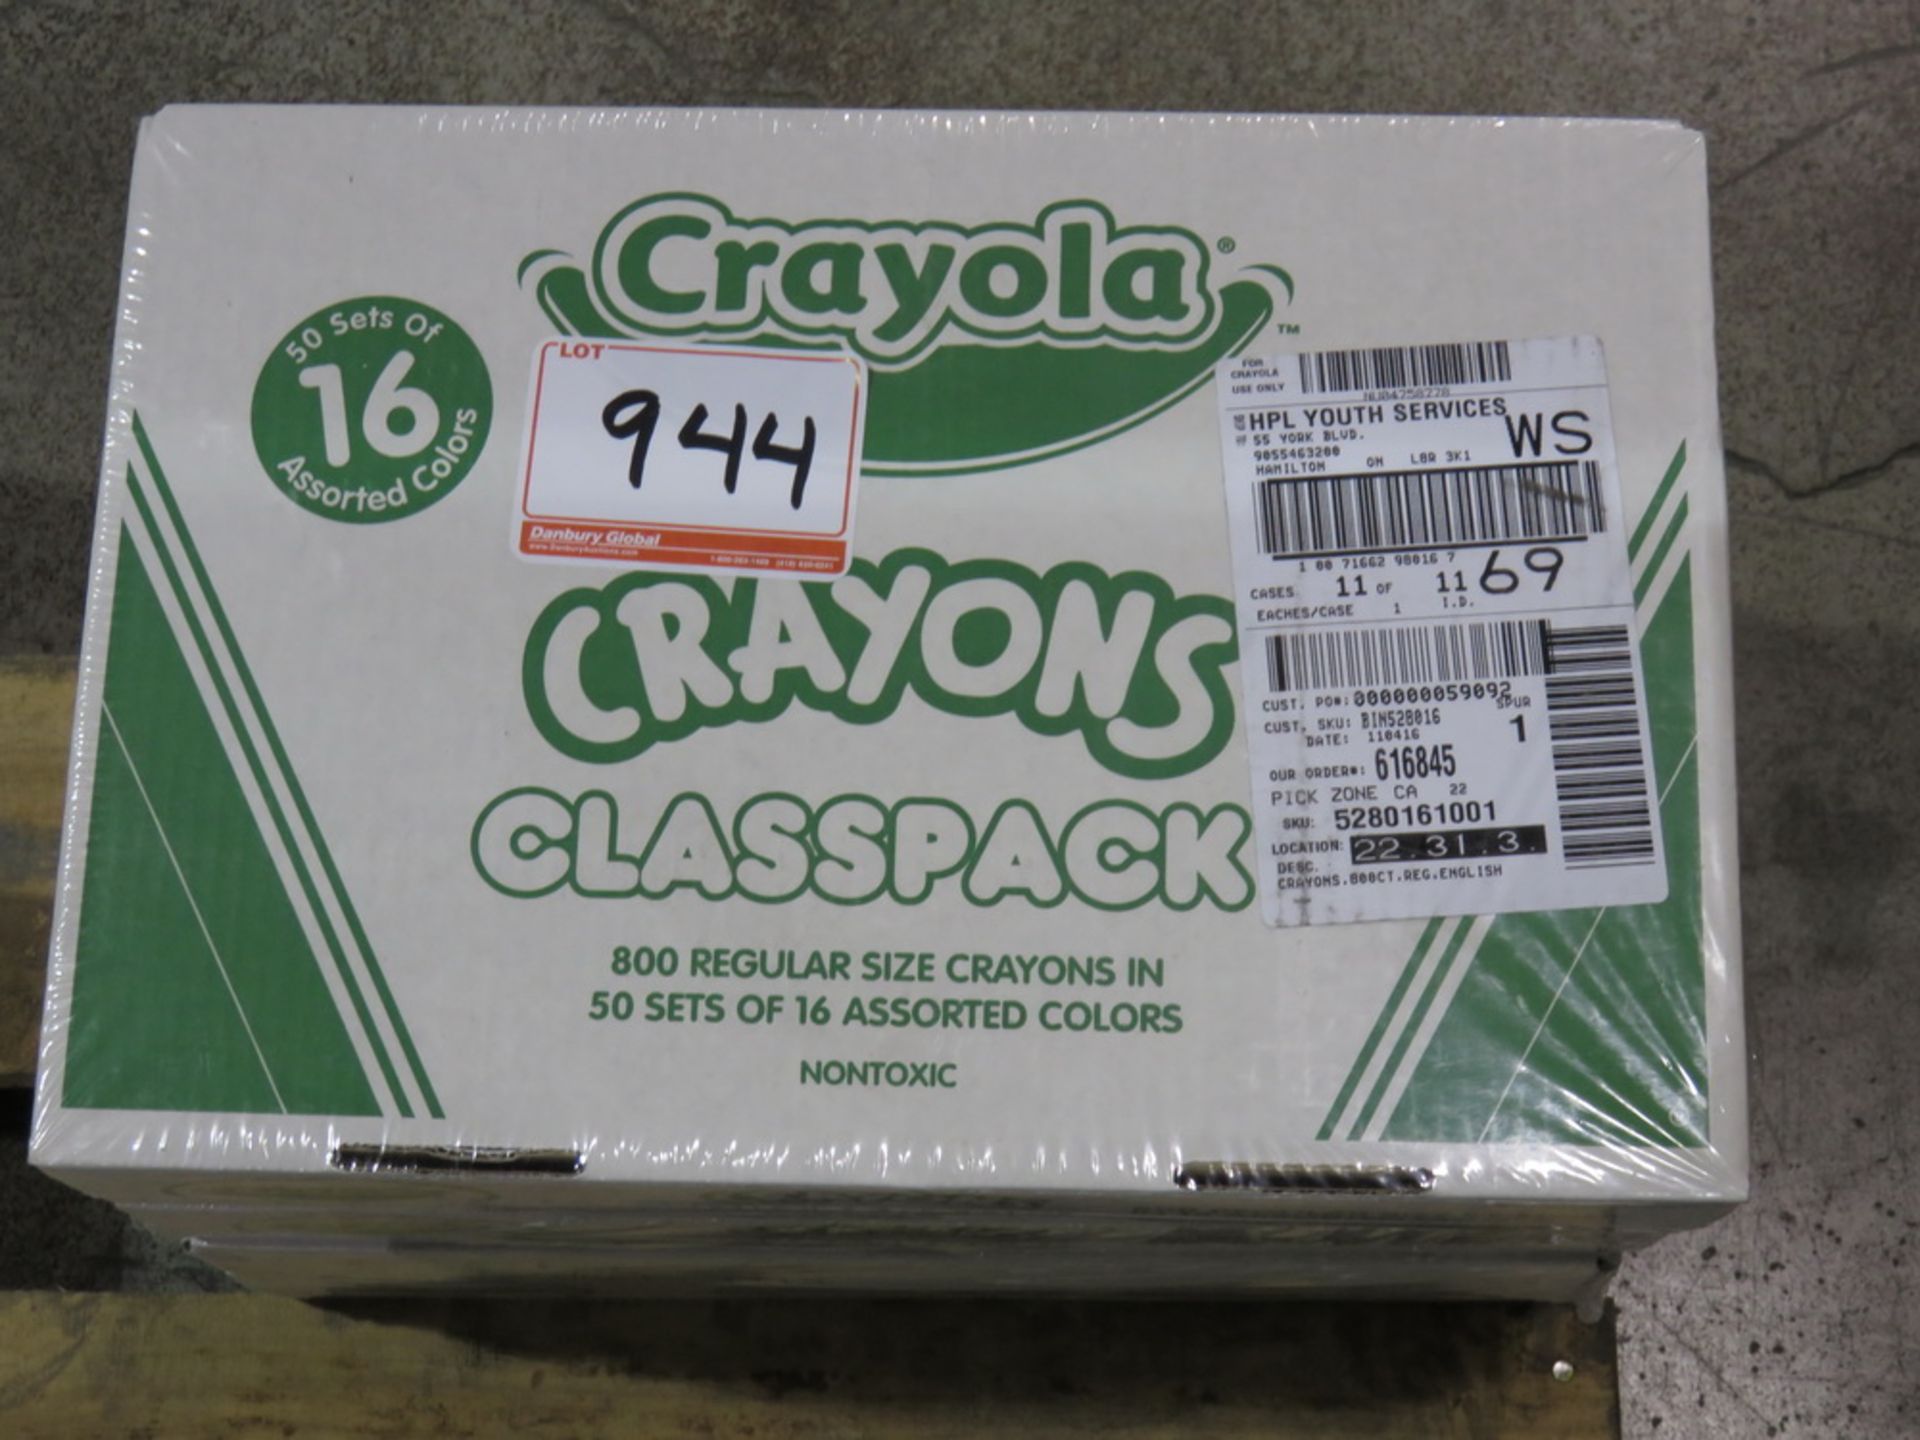 BOXES - CRAYOLA 800 REG SIZE CRAYONS IN 50 SETS OF 16 ASSTD COLORS